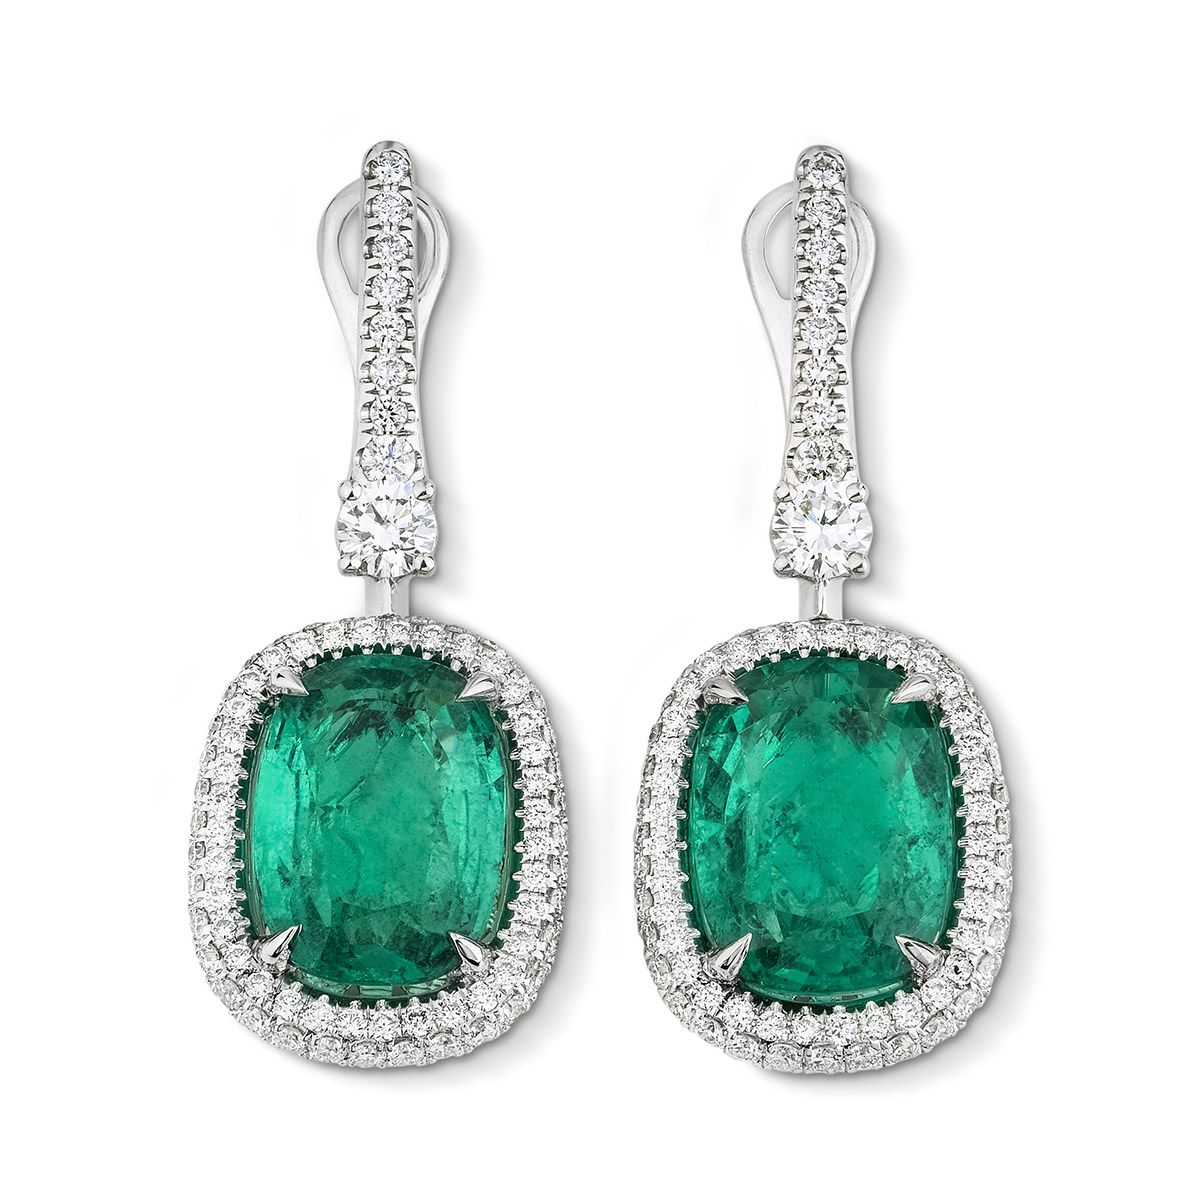 Natural Green Zambia Emerald Earrings, 7.50 Ct. TW, GRS Certified, GRS2016-111476, Unheated